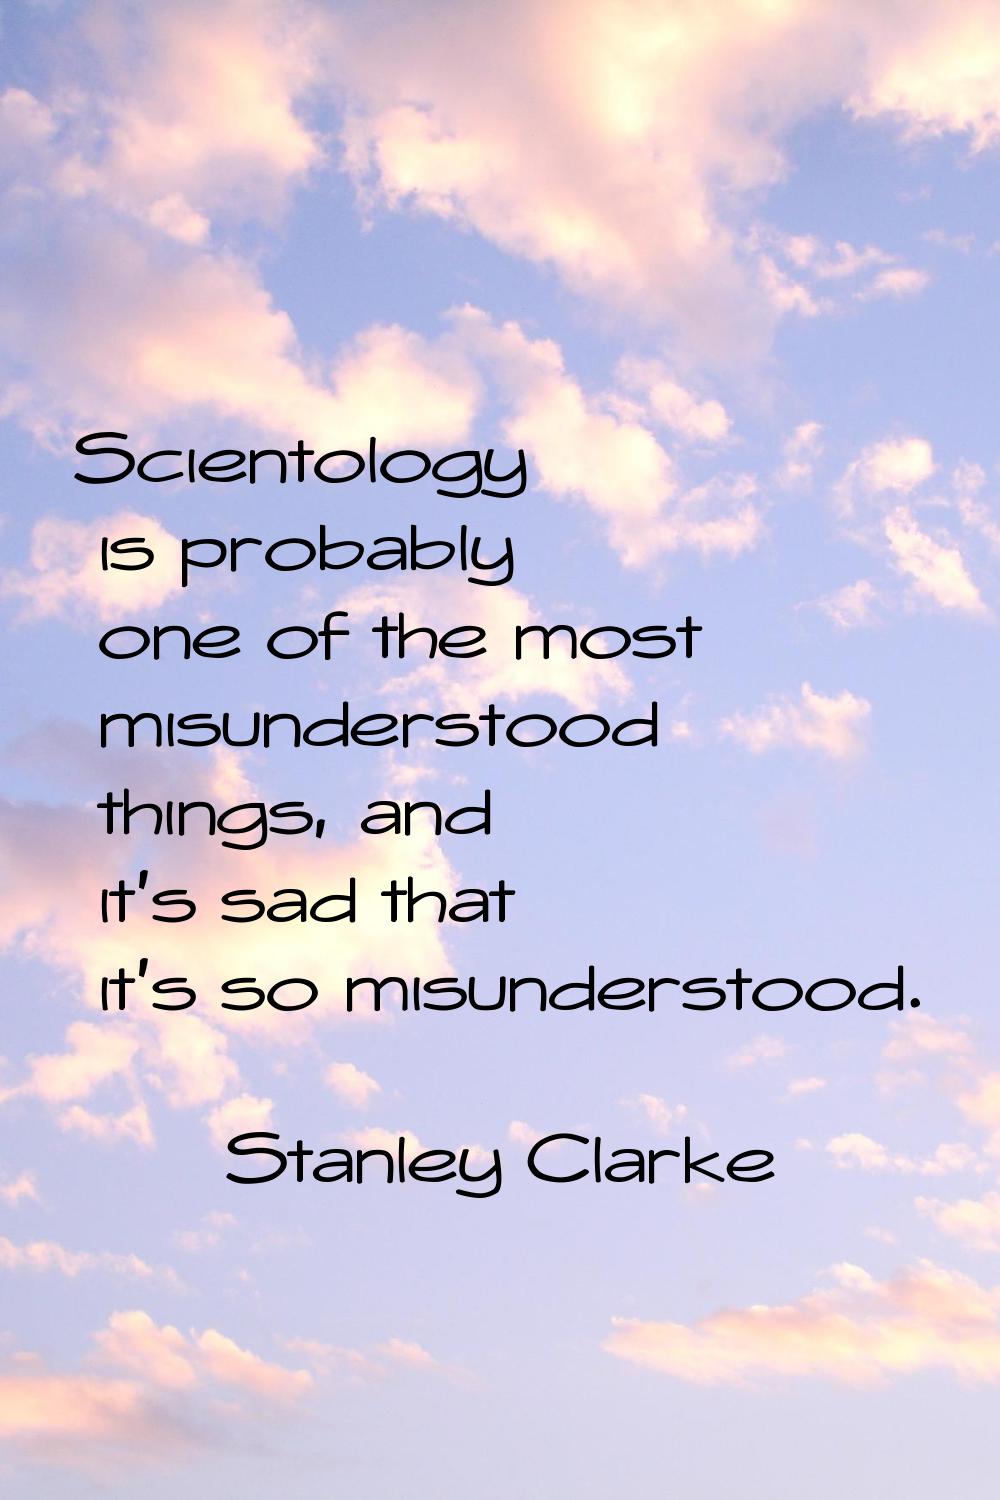 Scientology is probably one of the most misunderstood things, and it's sad that it's so misundersto